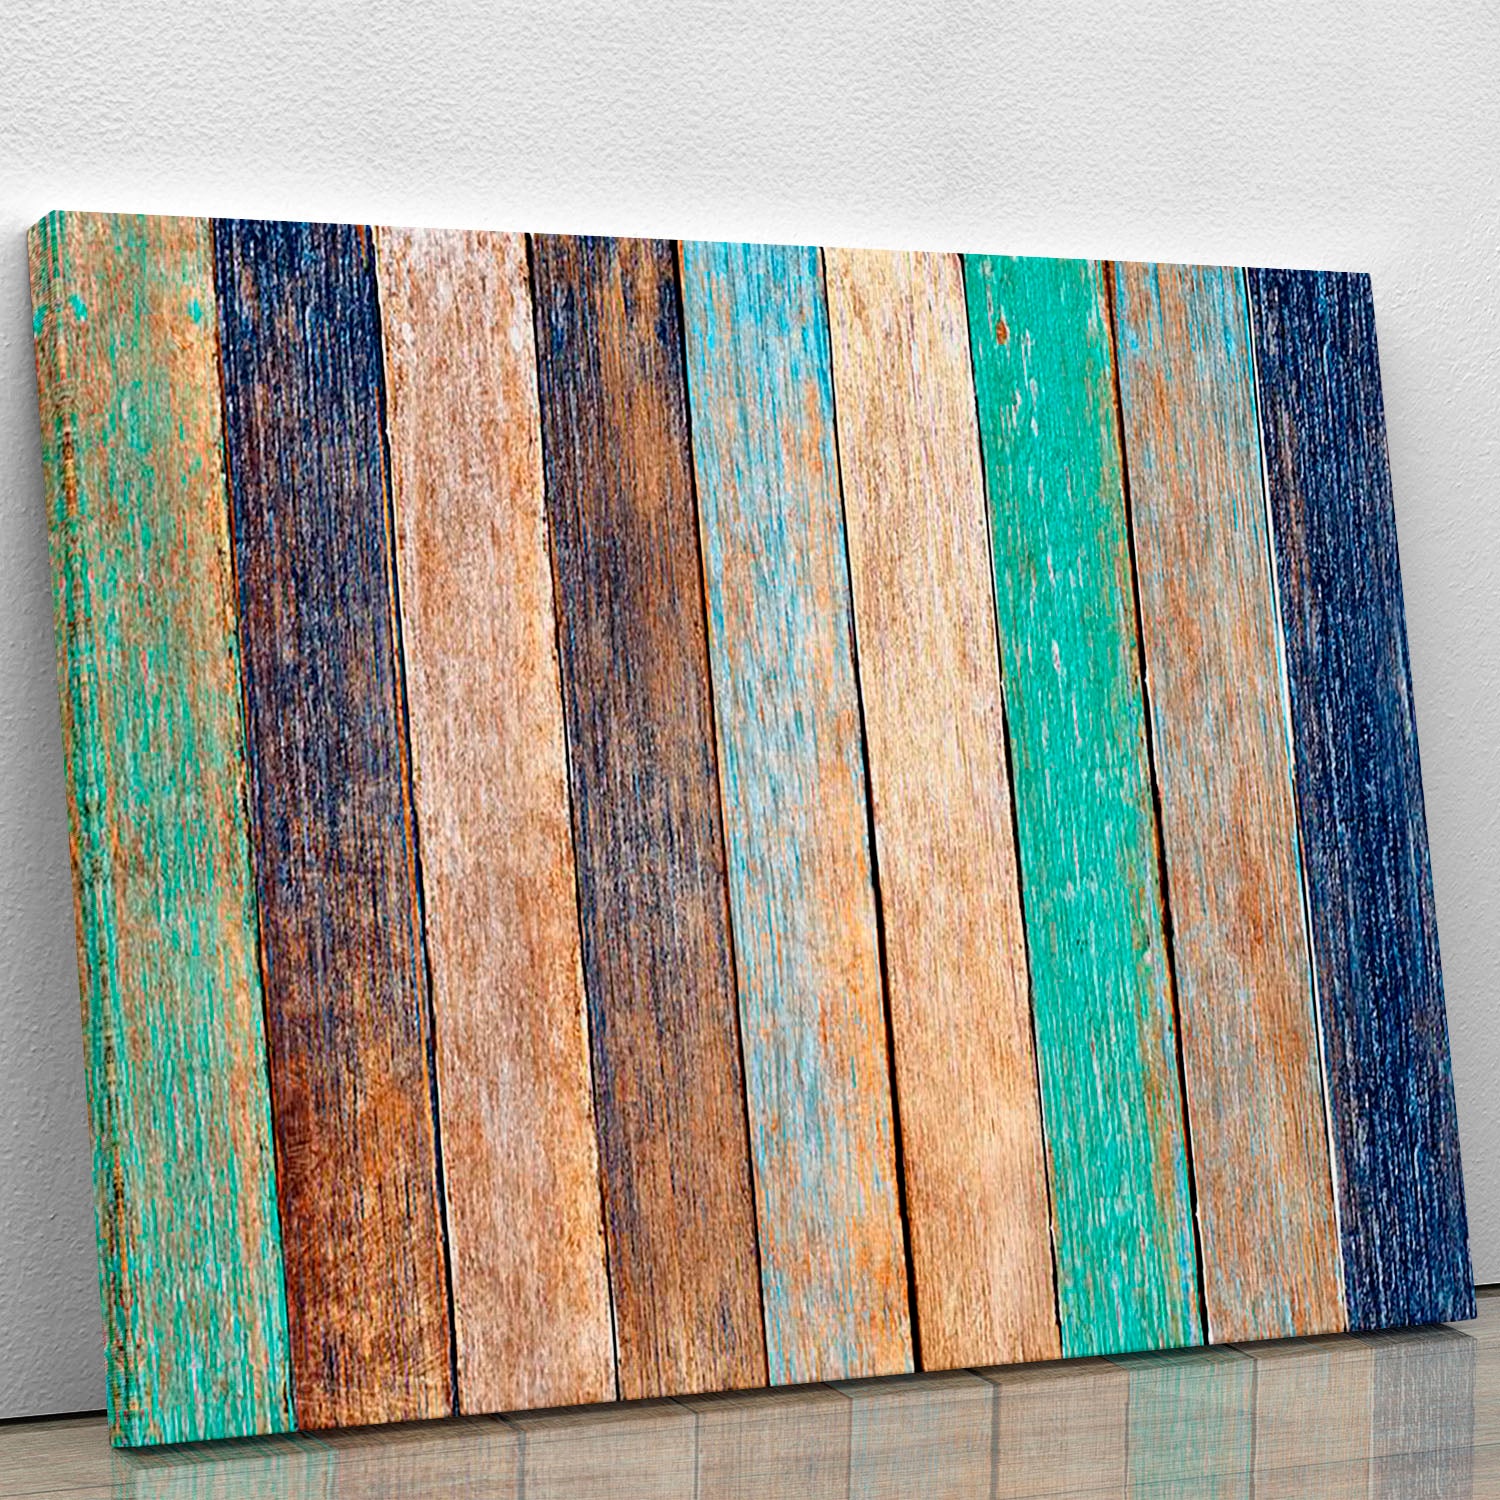 Colorful Wooden Plank Canvas Print or Poster - Canvas Art Rocks - 1